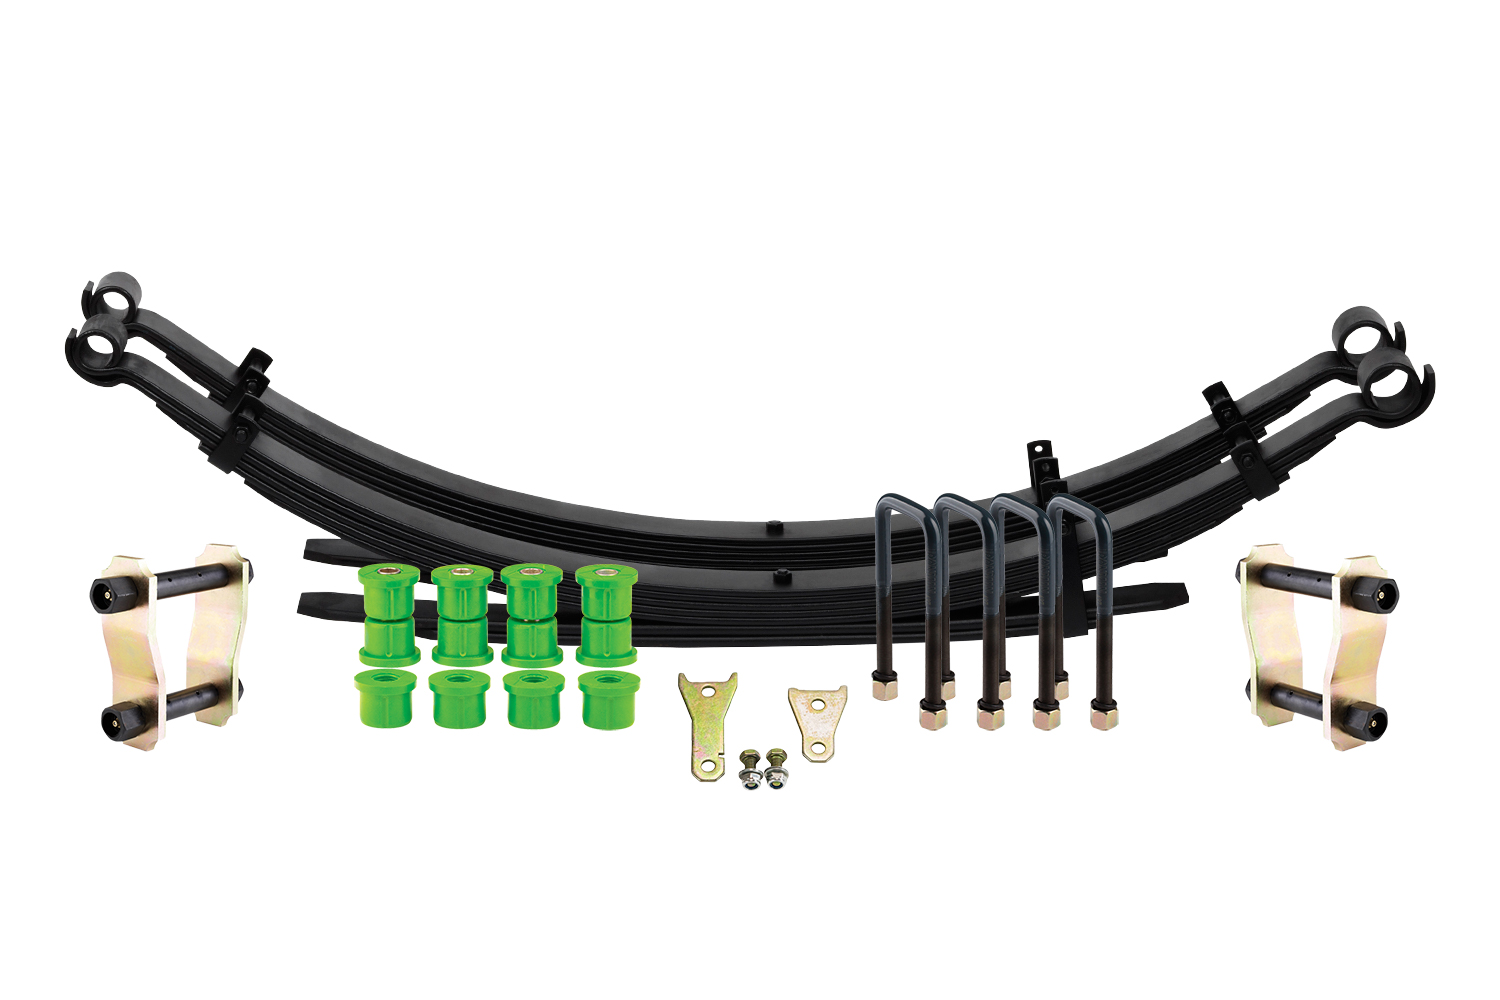 Is there a front and rear, and/or right and left for the leaf springs